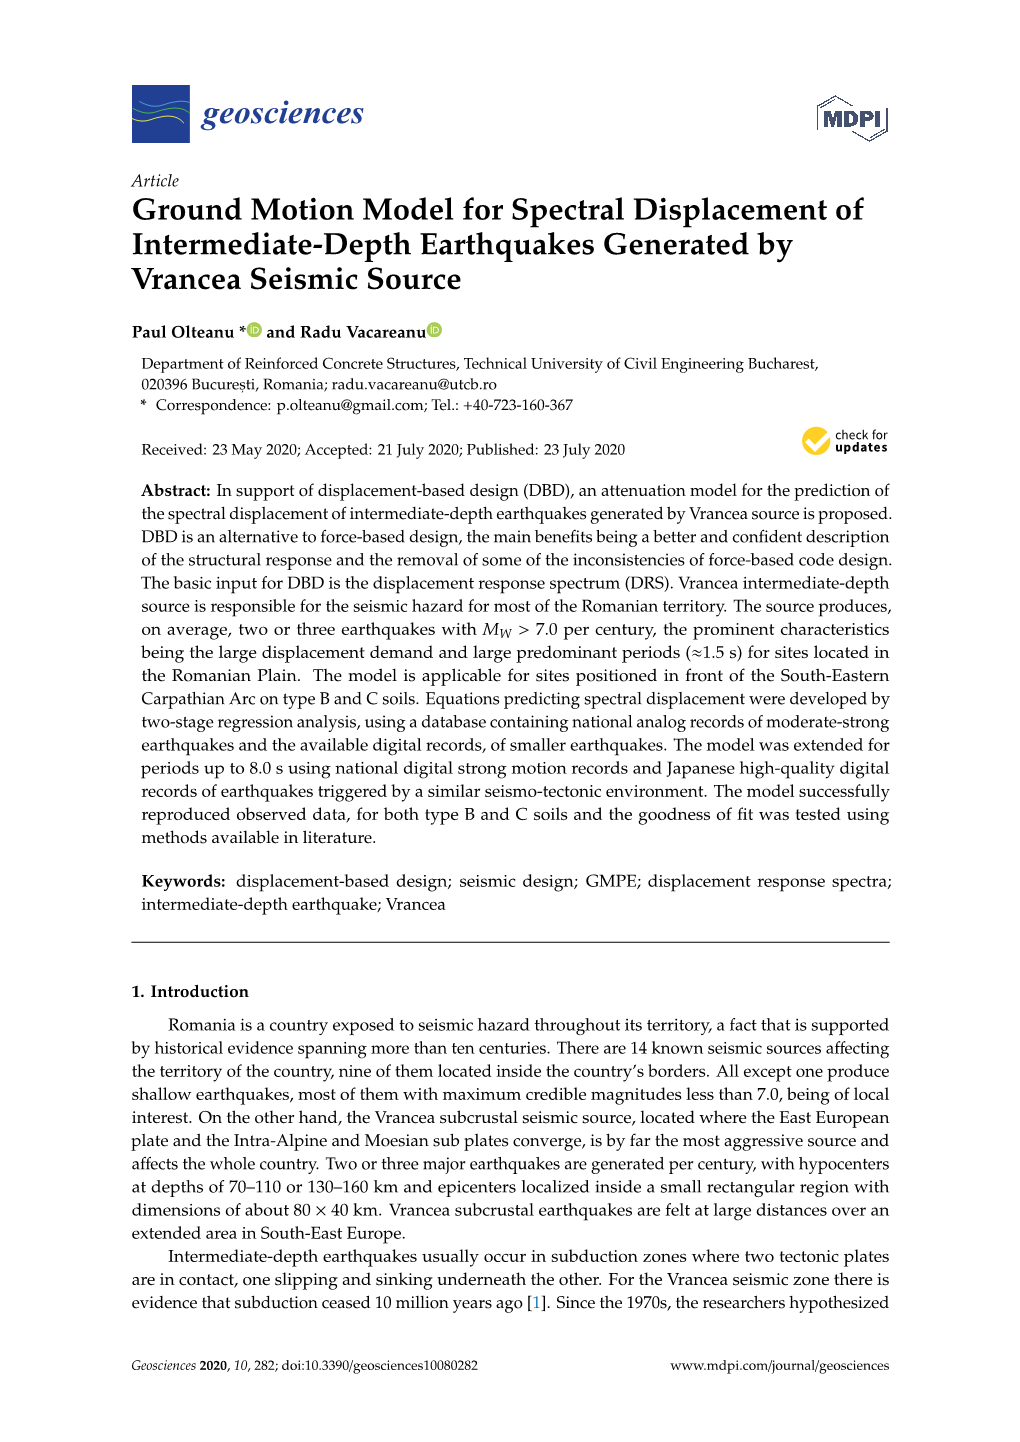 Ground Motion Model for Spectral Displacement of Intermediate-Depth Earthquakes Generated by Vrancea Seismic Source